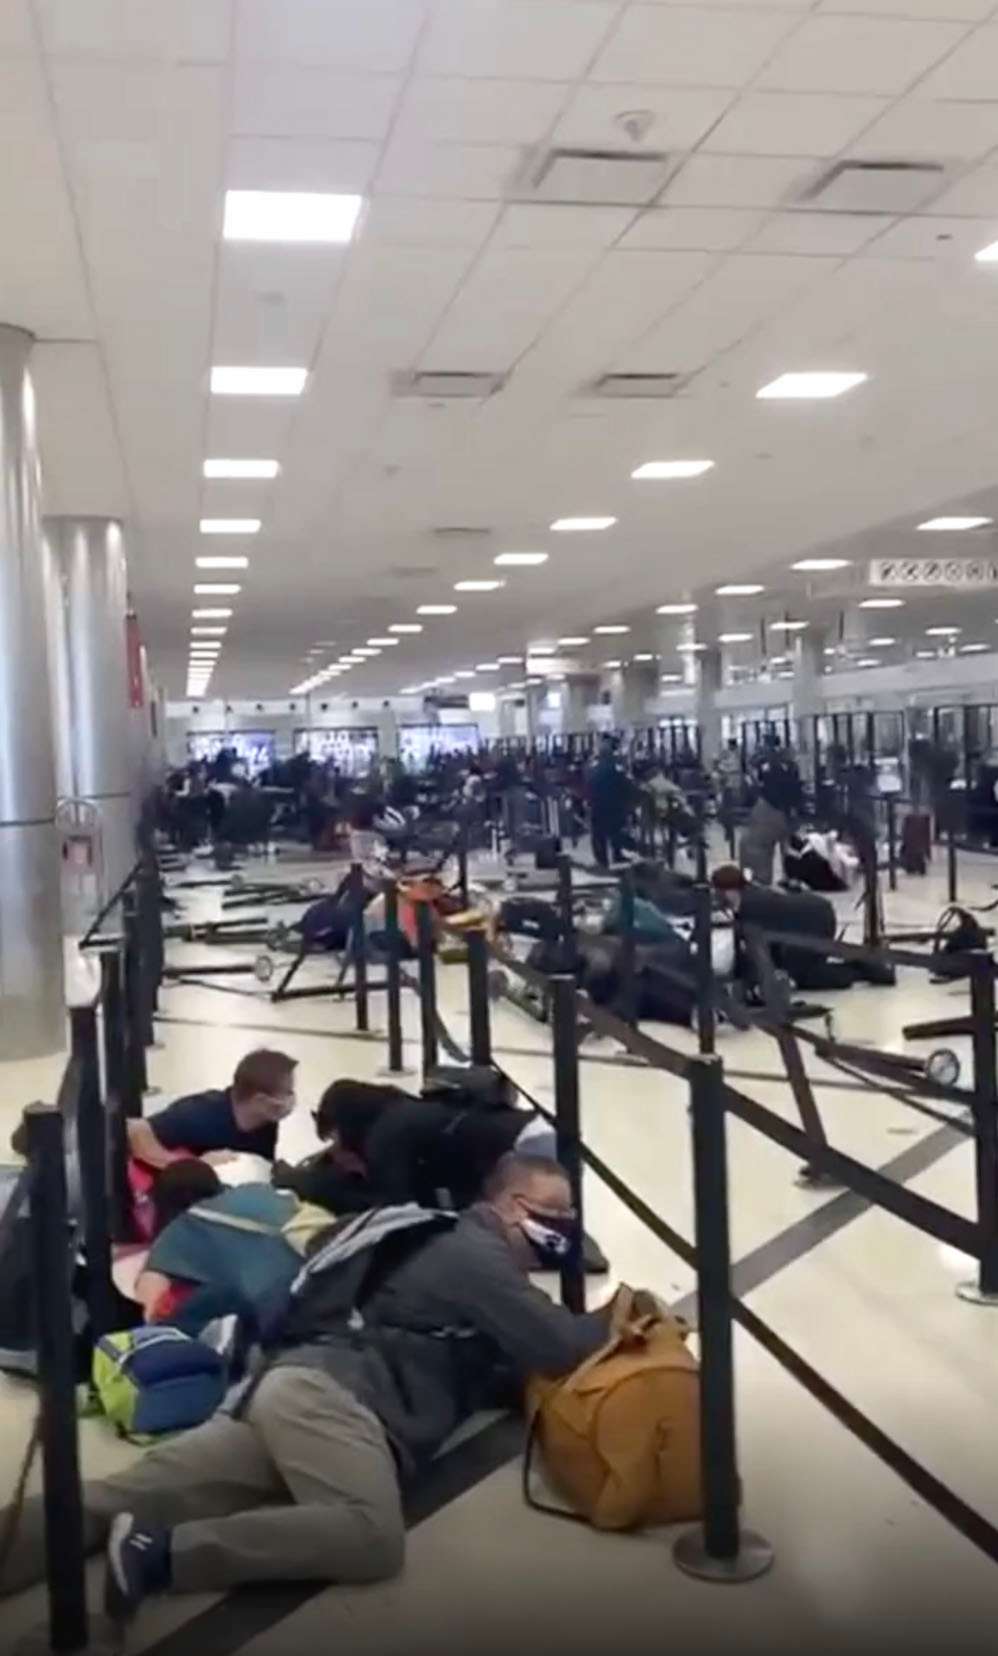 PHOTO: A still from a social media video showing the moments after a gun was accidentally discharged inside Hartsfield-Jackson Atlanta International Airport in Atlanta on Nov. 20, 2021.